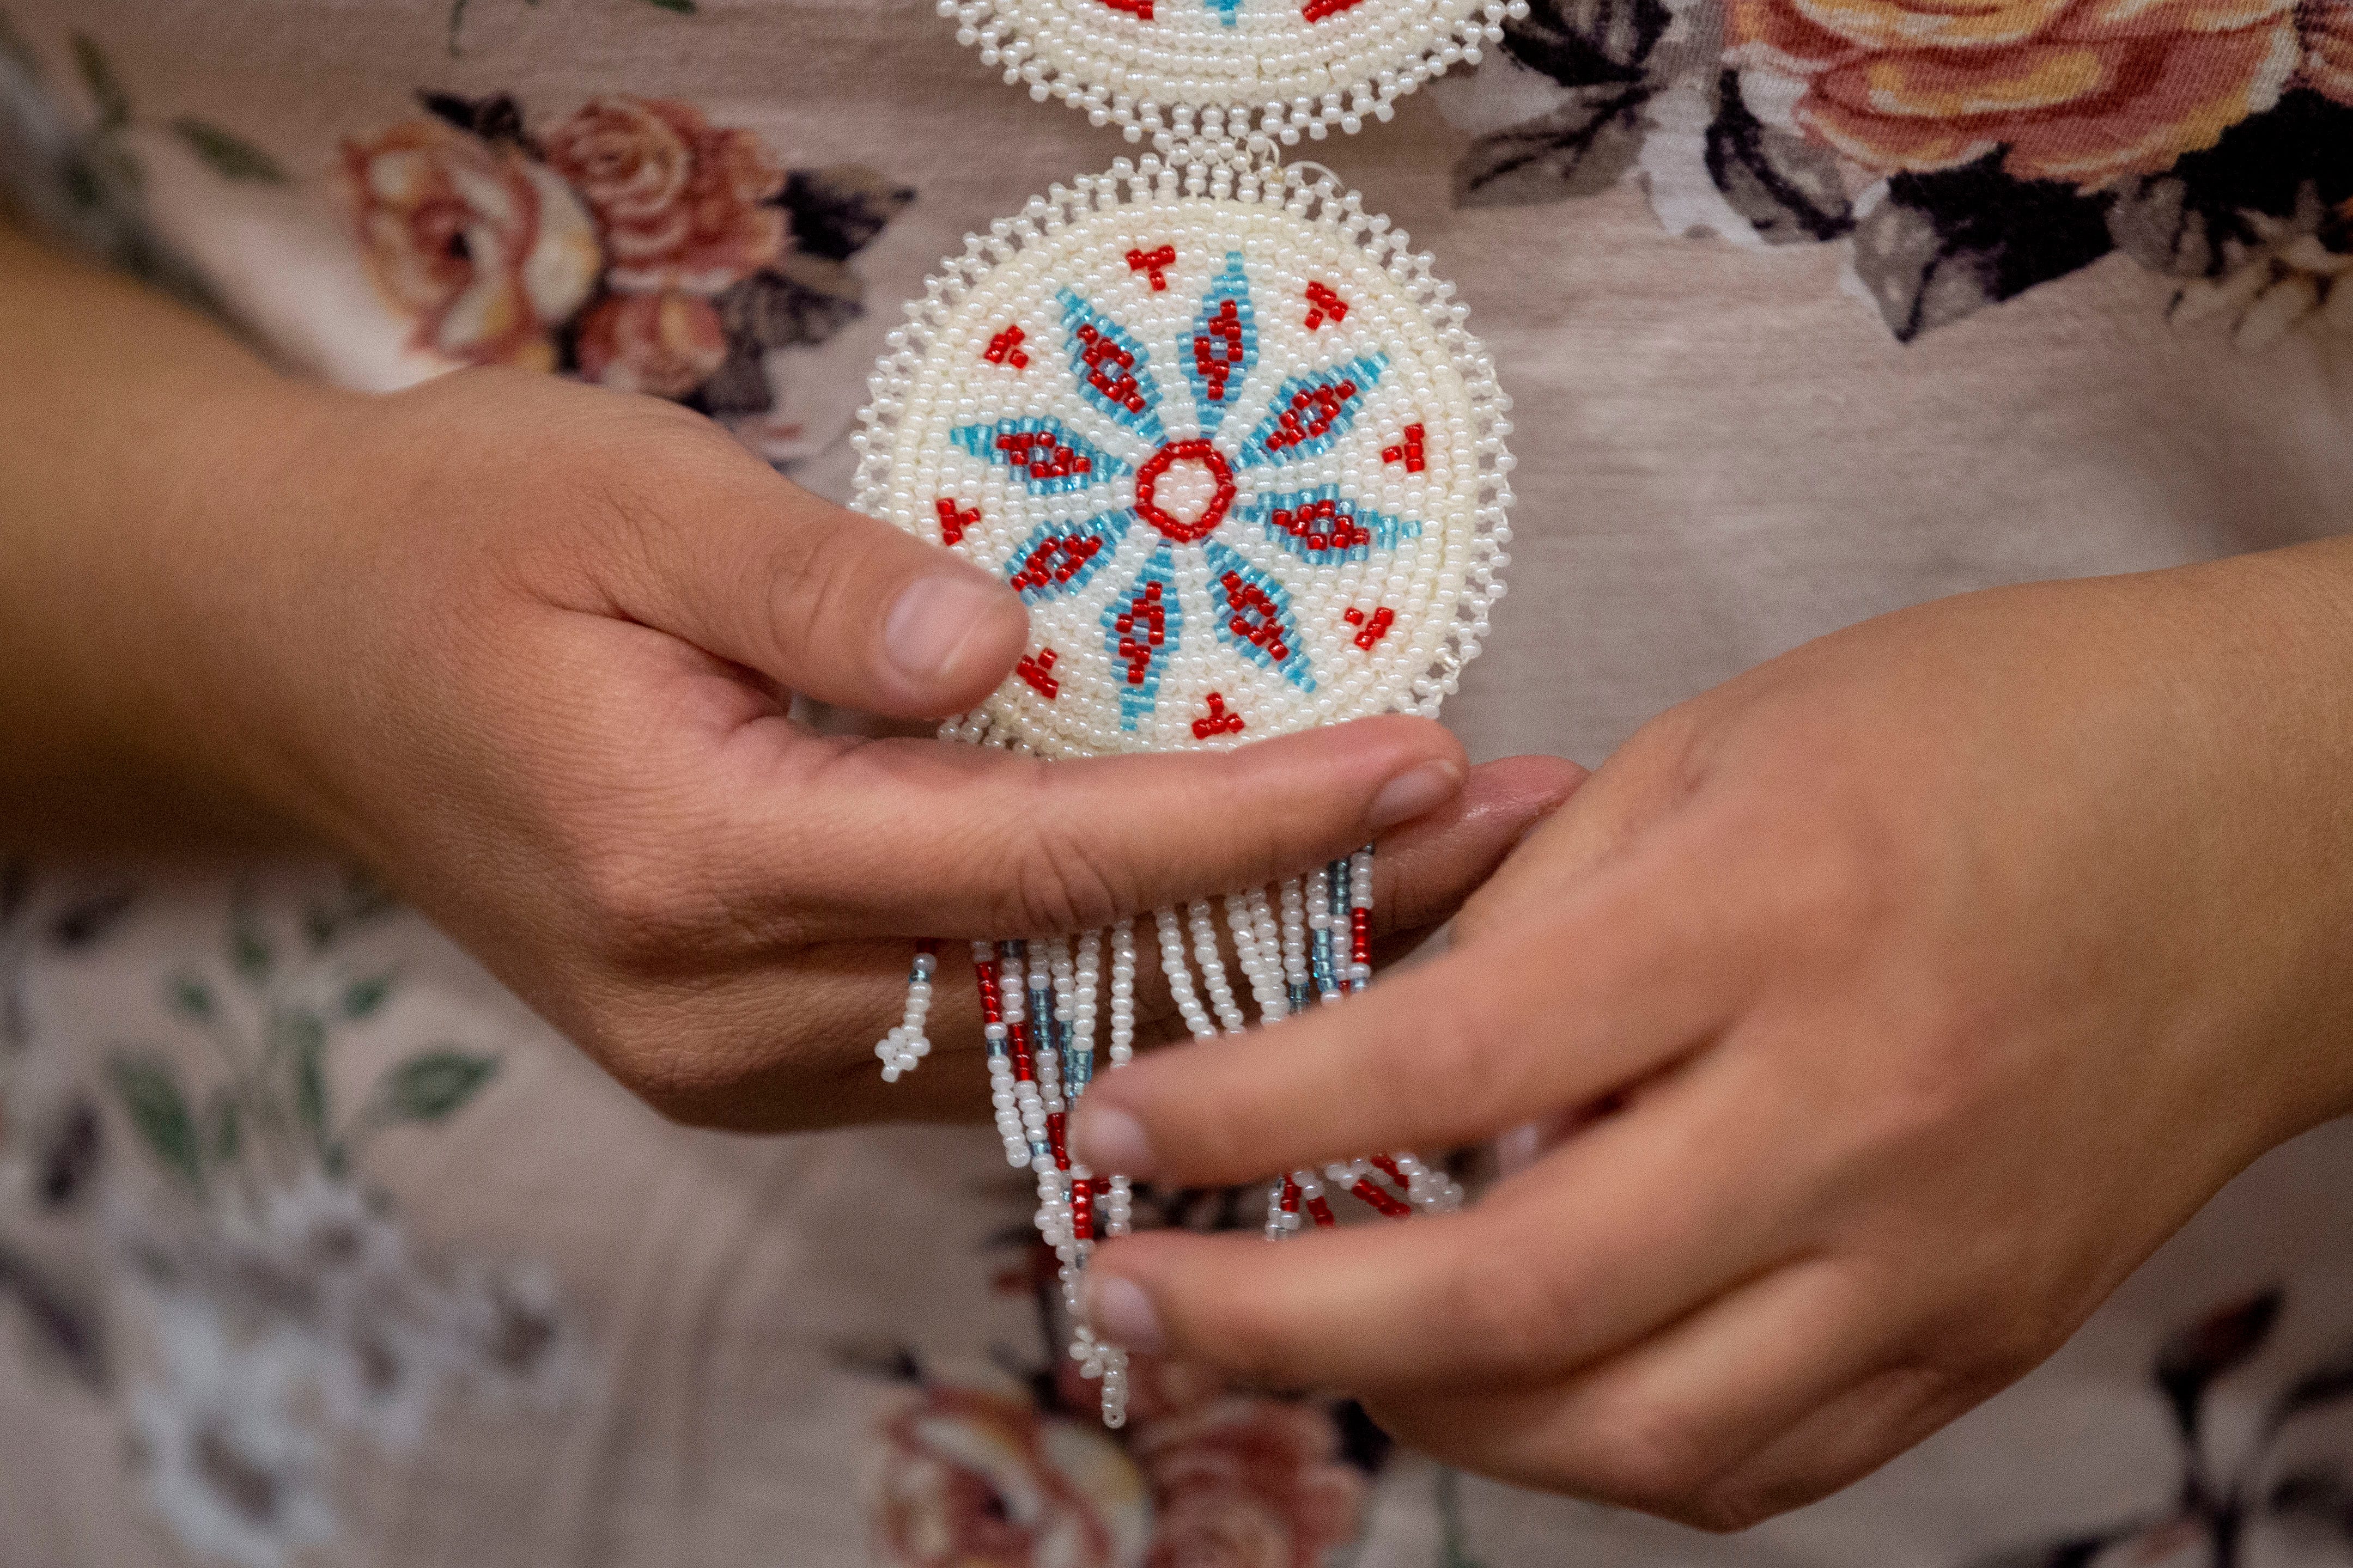 Andrea Thompson talks about her beadwork while holding on to her three-tiered medallion necklace Thursday, Nov. 5, 2020, at the Choctaw reservation in Henning.